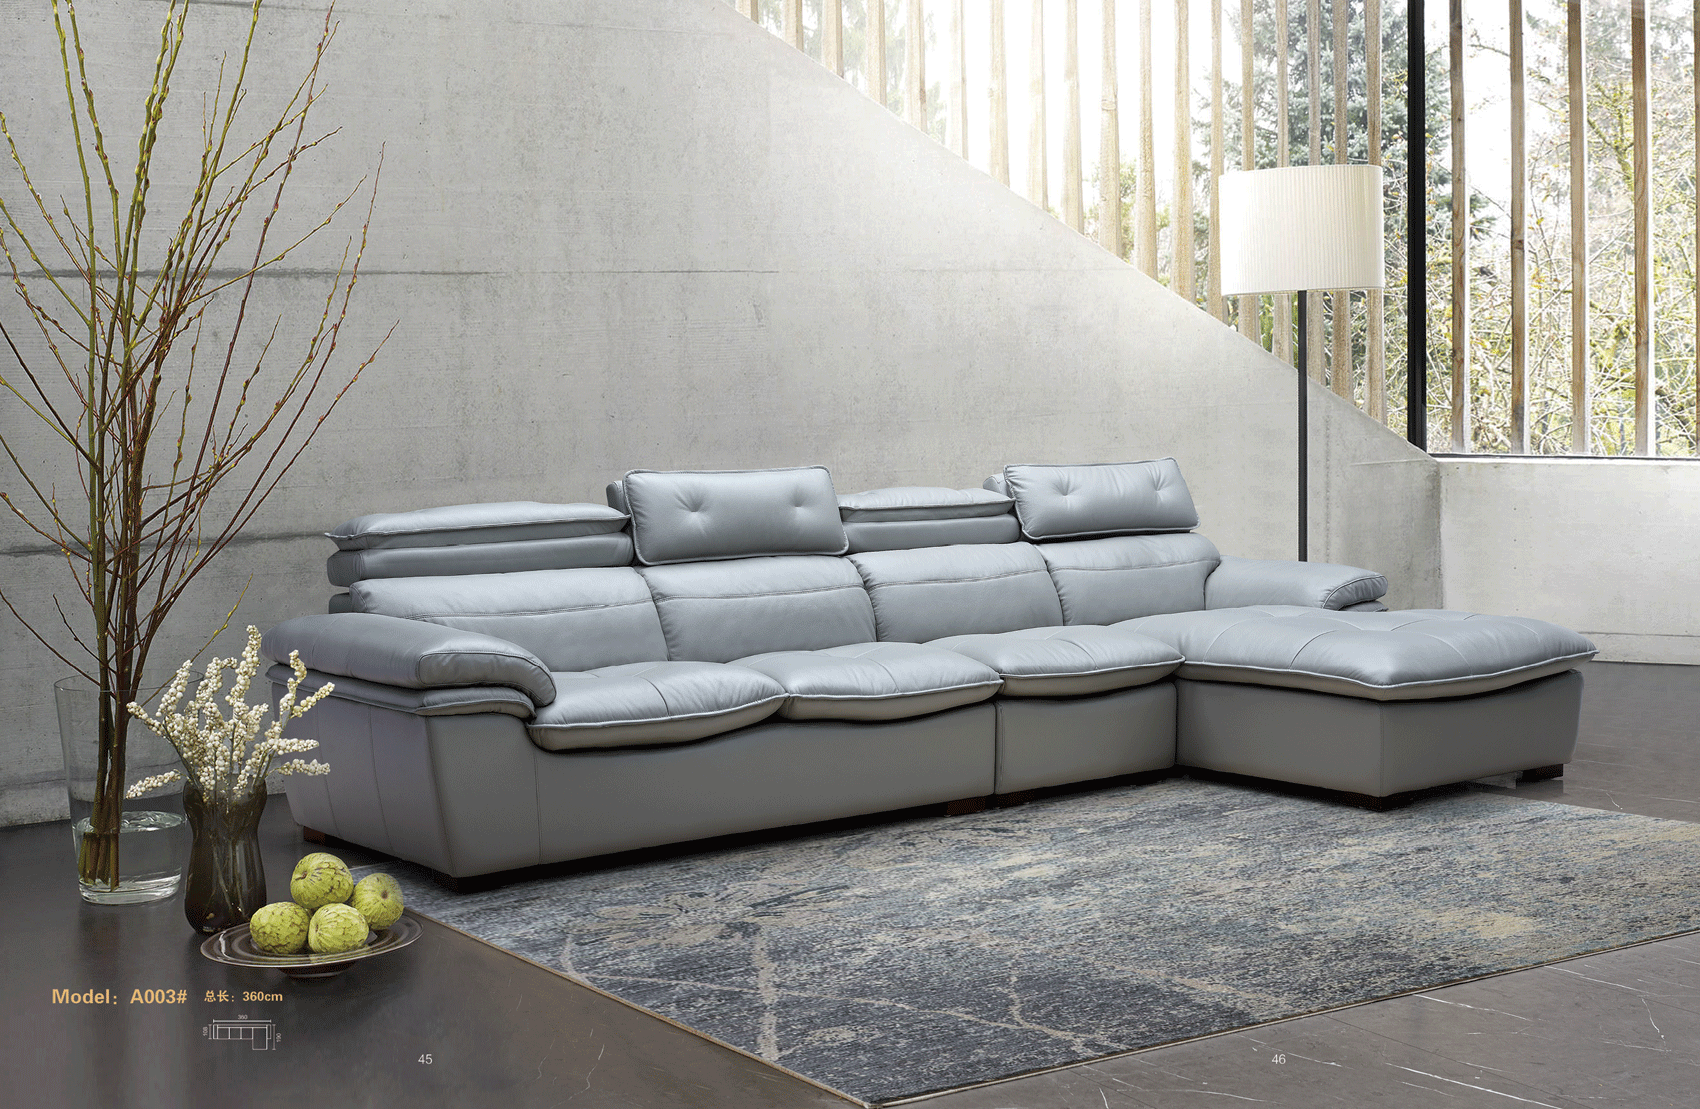 Living Room Furniture Reclining and Sliding Seats Sets A003 Sectional